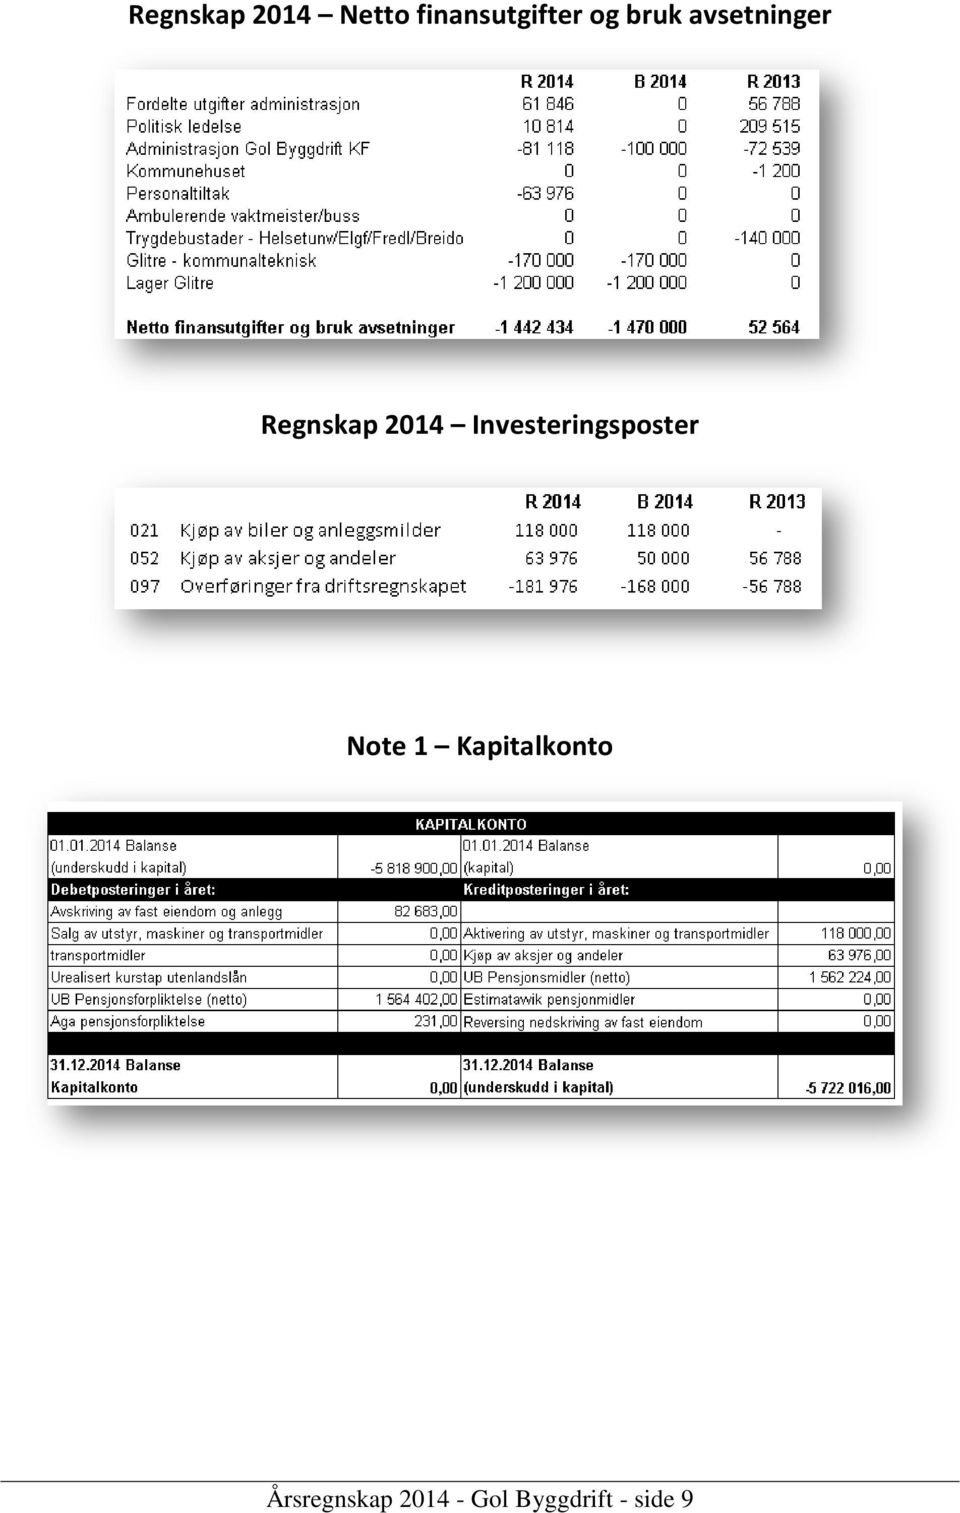 Investeringsposter Note 1